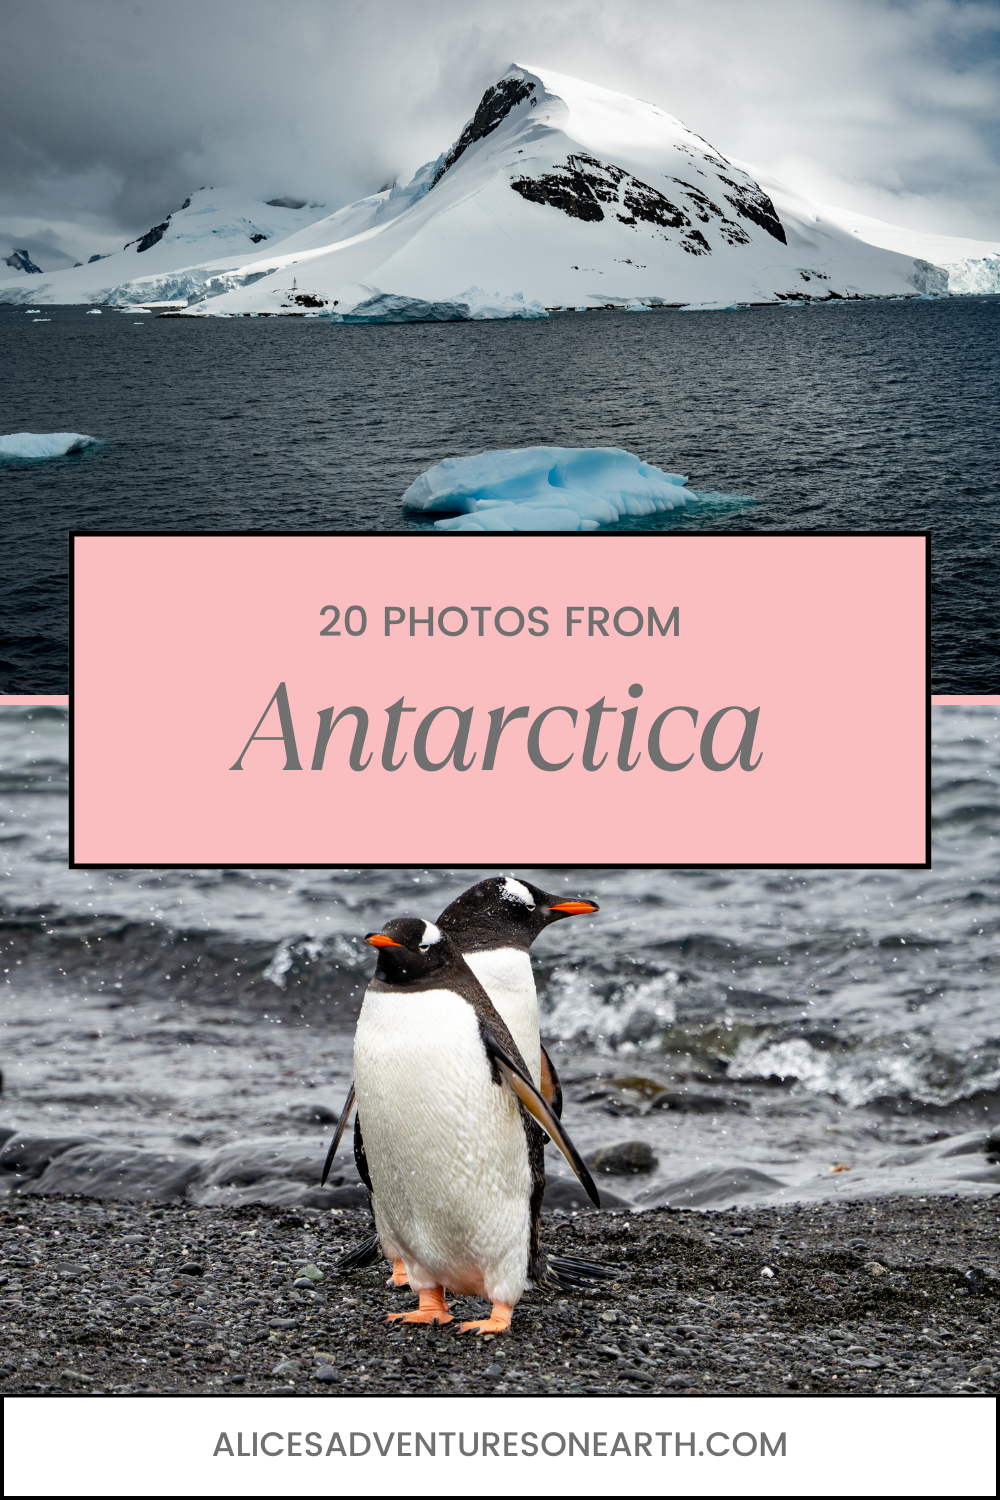 Get lost in the beauty of Antarctica with these stunning photos 📸❄️🐧. These 20 captivating images will leave you breathless and inspired to visit the coldest, most mysterious continent on earth!      